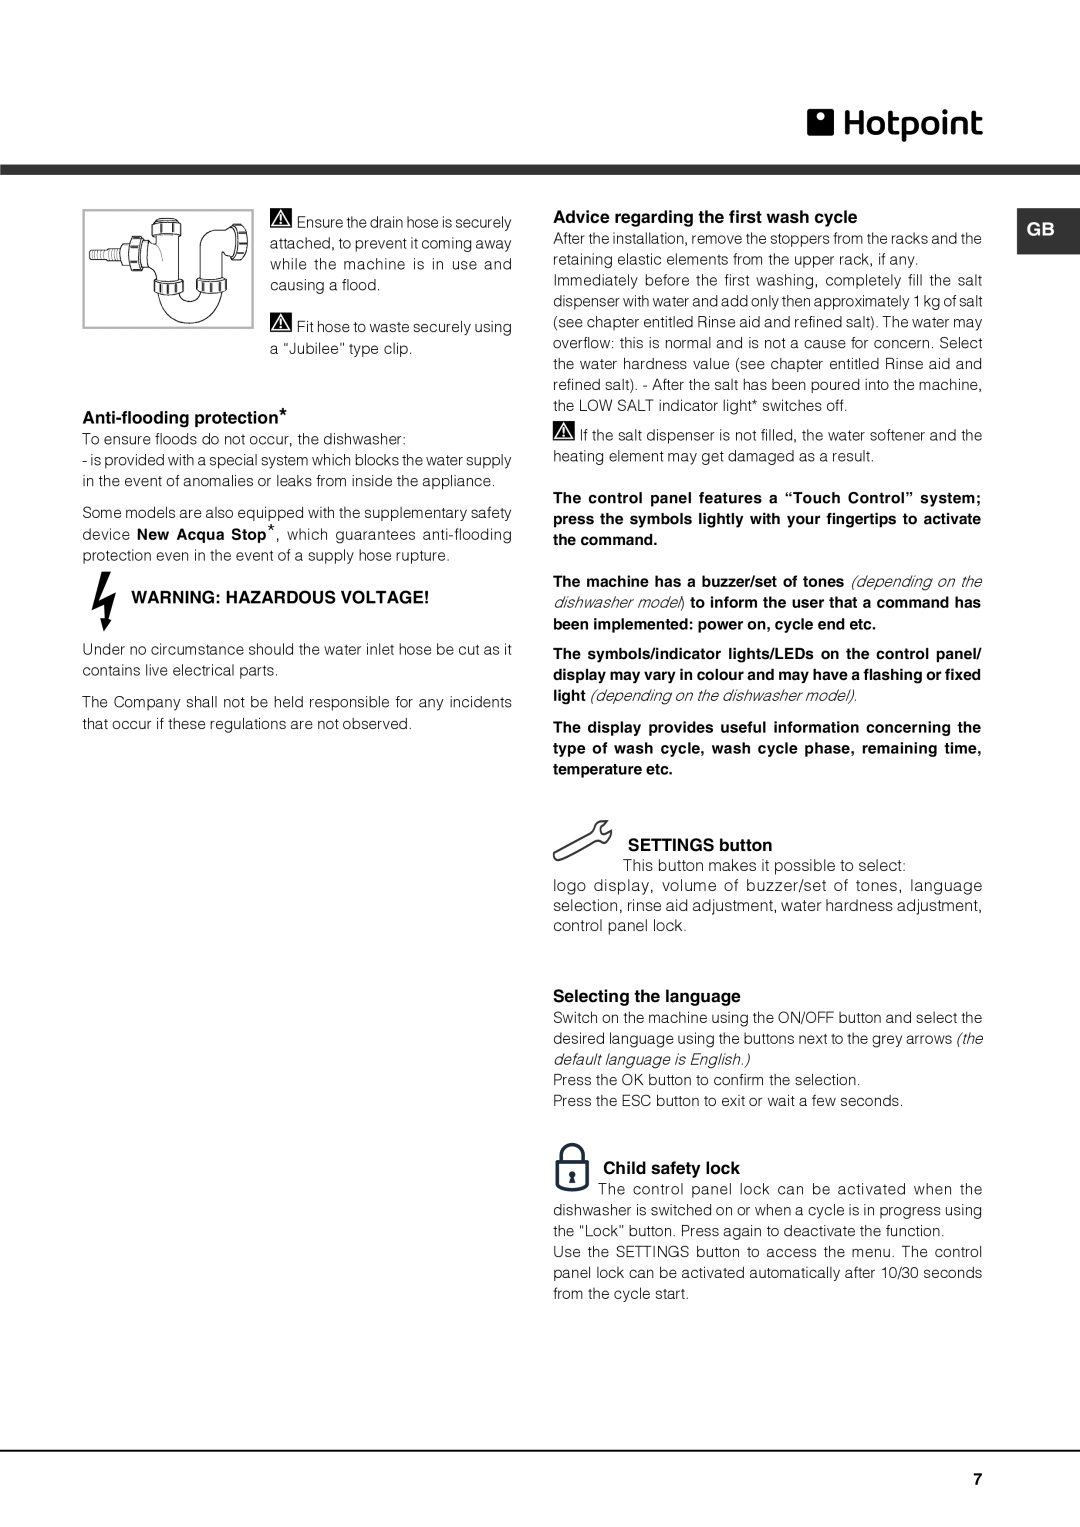 Hotpoint 51110 Anti-flooding protection, Warning Hazardous Voltage, Advice regarding the first wash cycle, SETTINGS button 